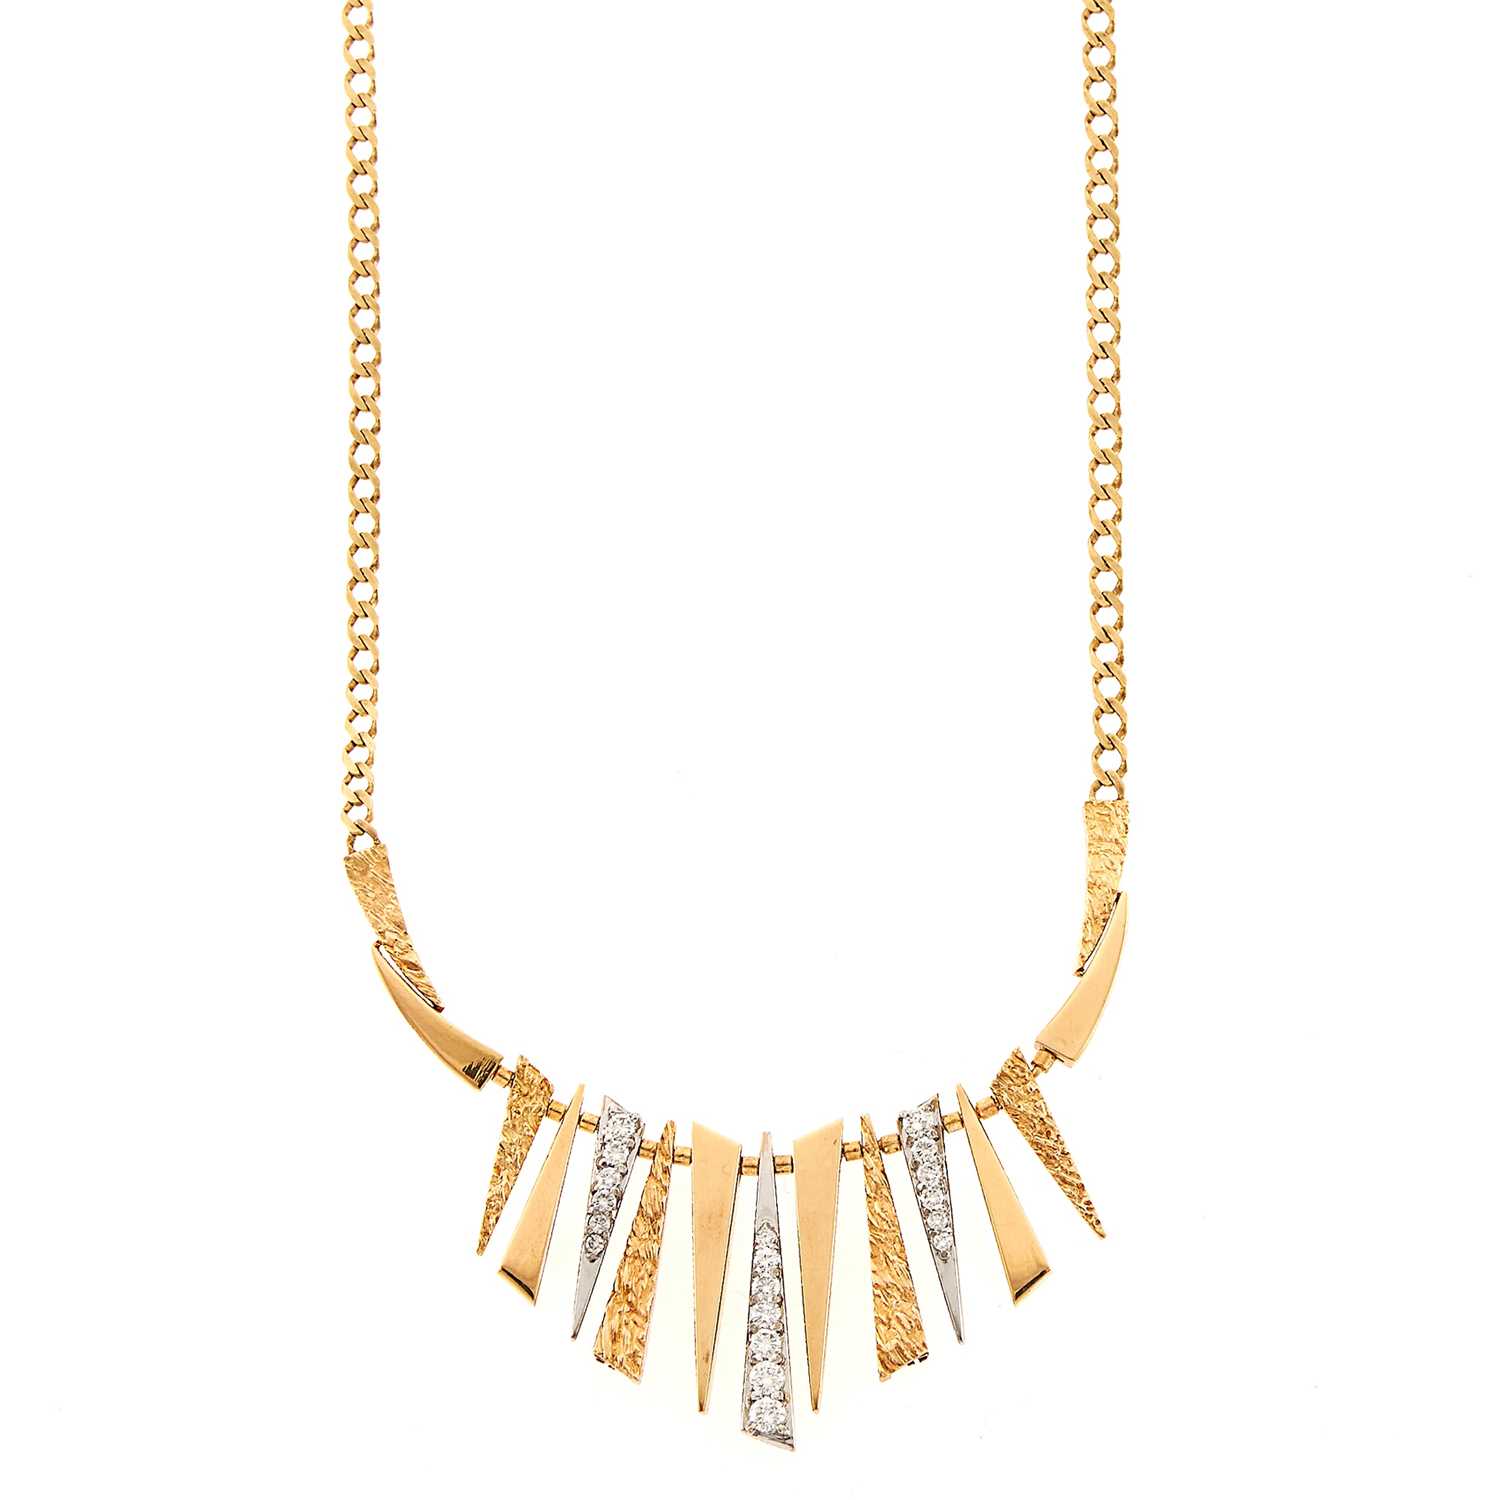 Lot 1047 - Two-Color Gold and Diamond Fringe Necklace